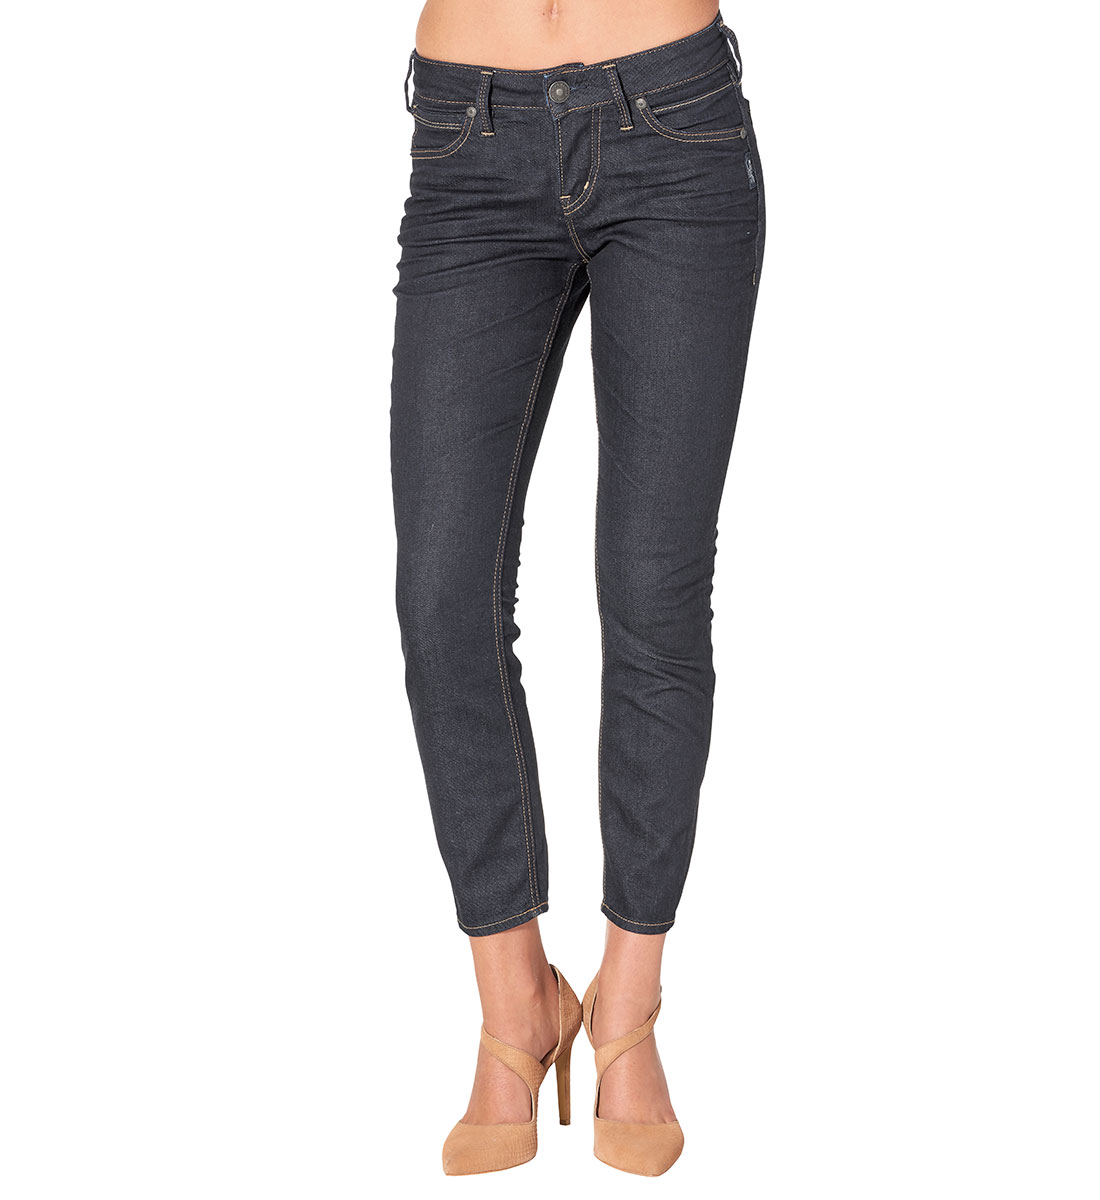 silver aiko ankle skinny jeans